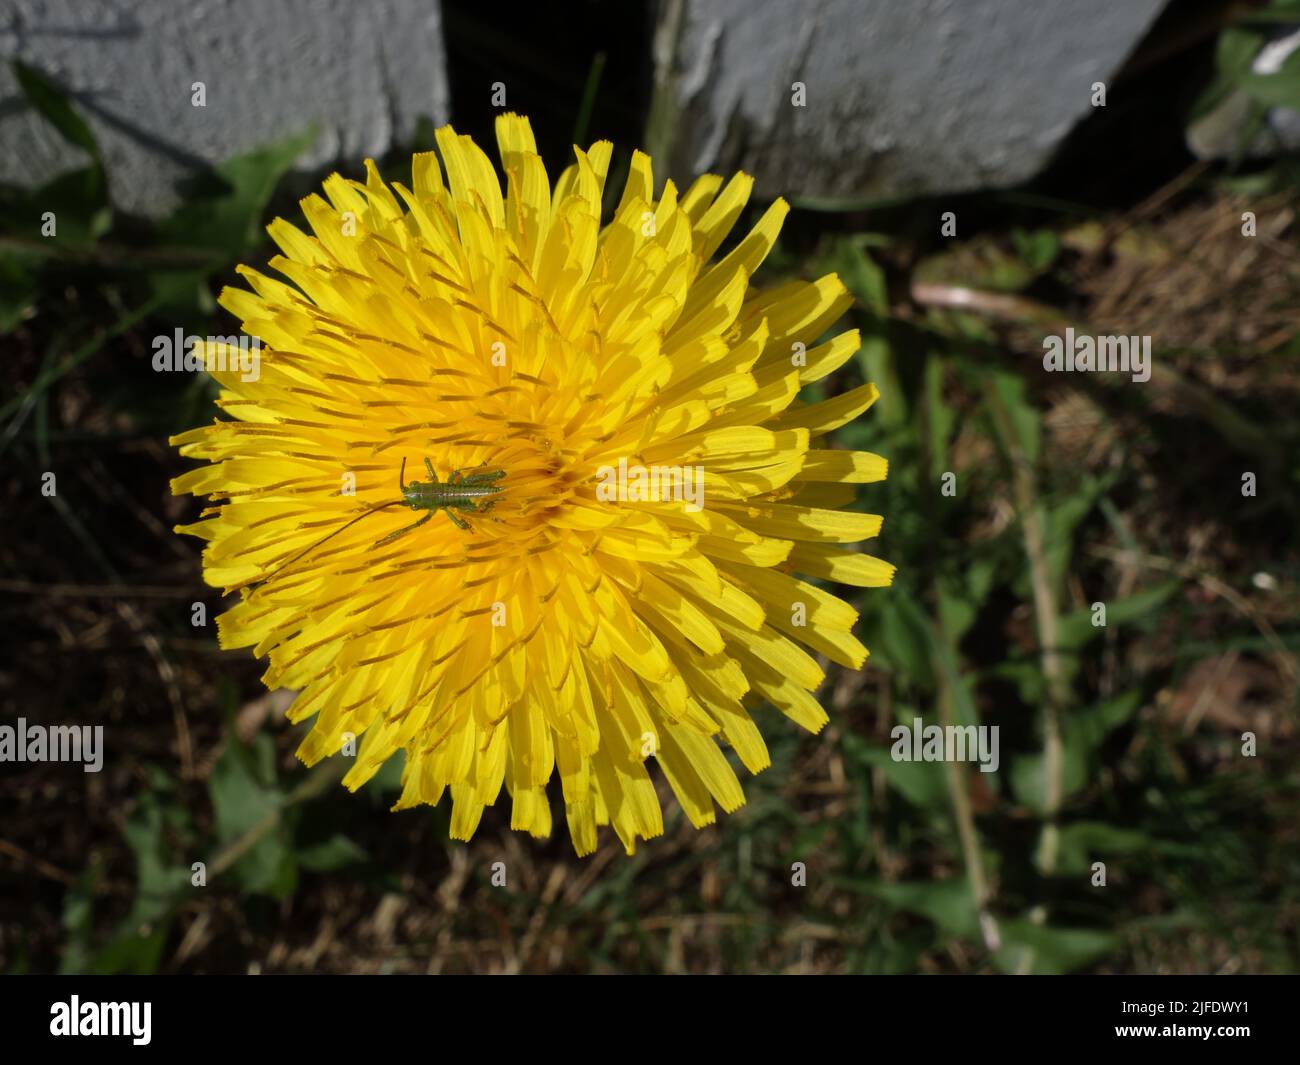 A small grasshopper that takes a rest in the yellow flower, Dandelion. Stock Photo